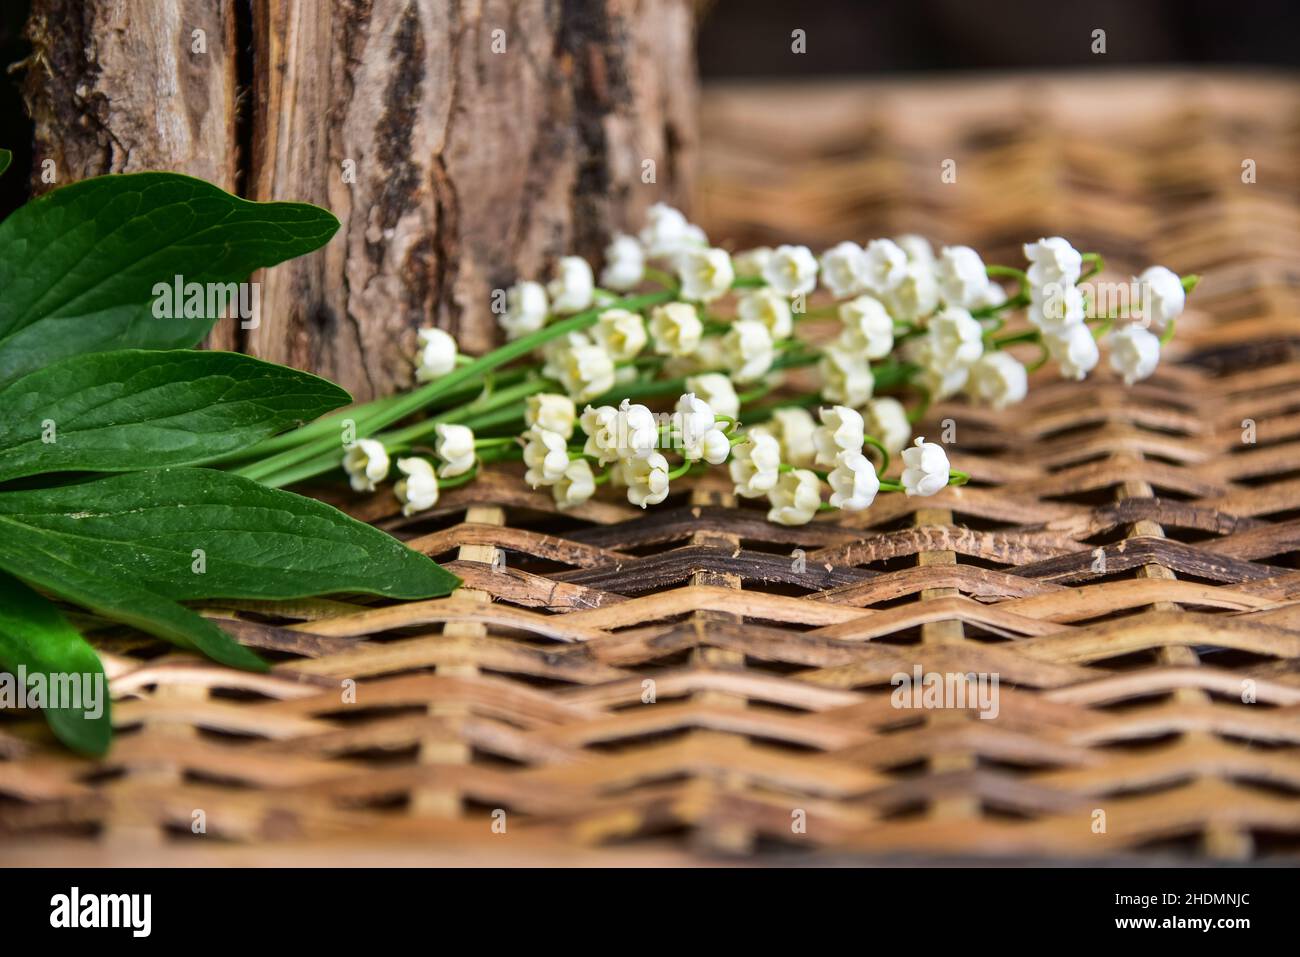 lily of the valley, lily of the valleys Stock Photo